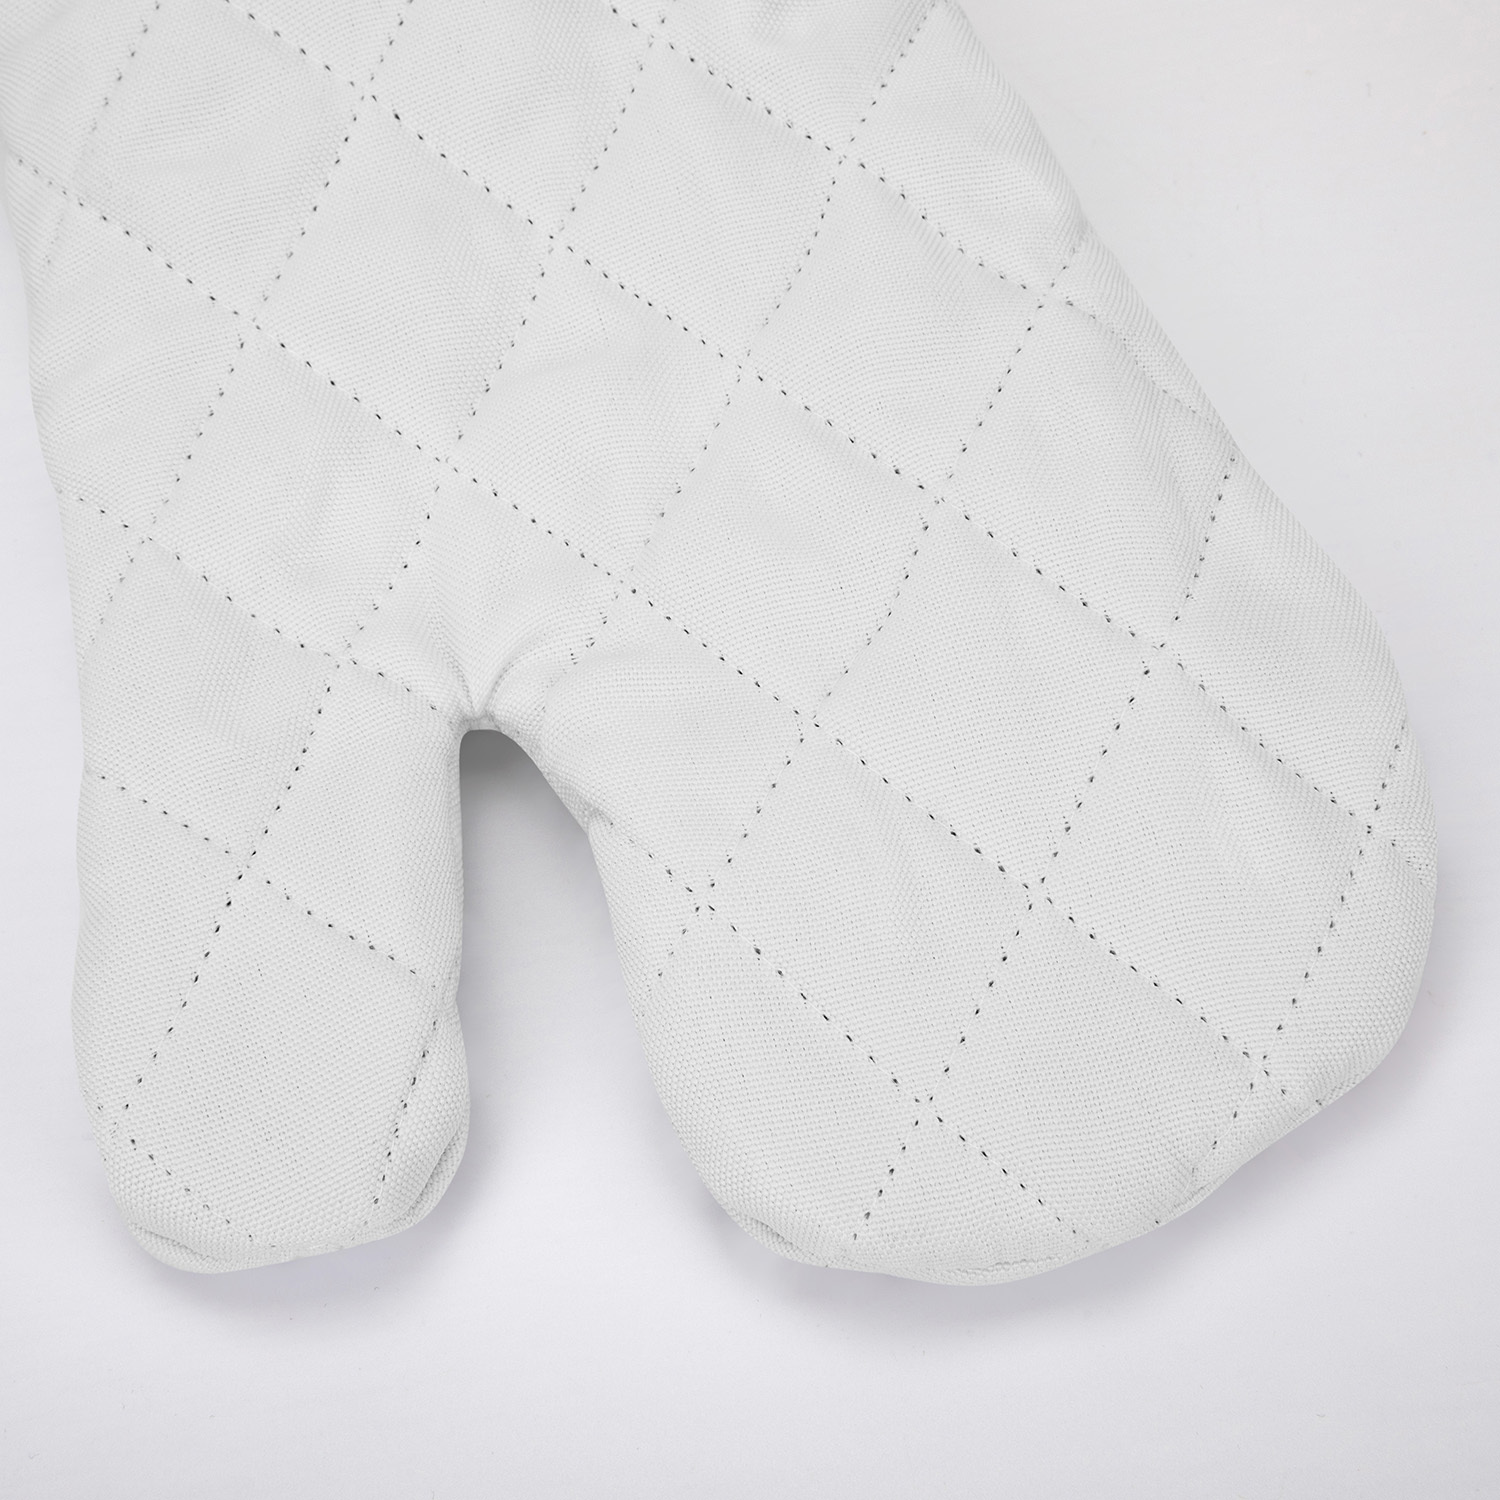 Microwave Oven Gloves & Insulation Pad | HugePOD-9